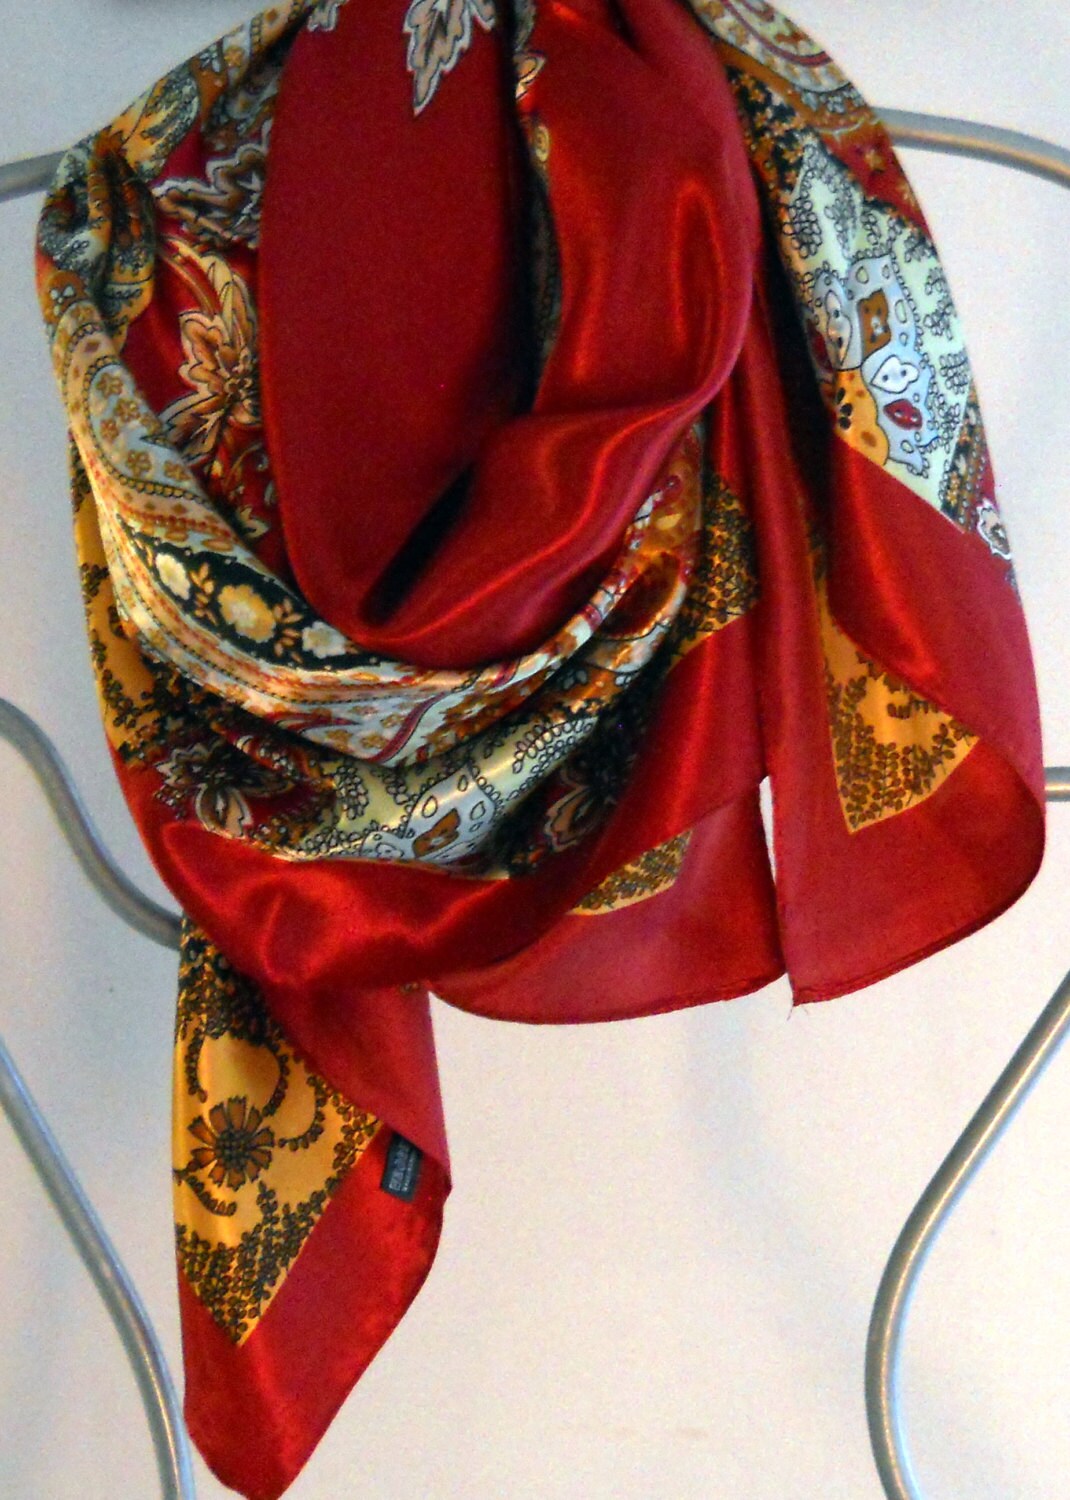 SALE-----Festival Shawl,Womens Fashion Scarf,Red Scarf, Square Rayon  Scarf,Gold Wrap,Womens Scarves,Paisley Scarf, Gift For Her